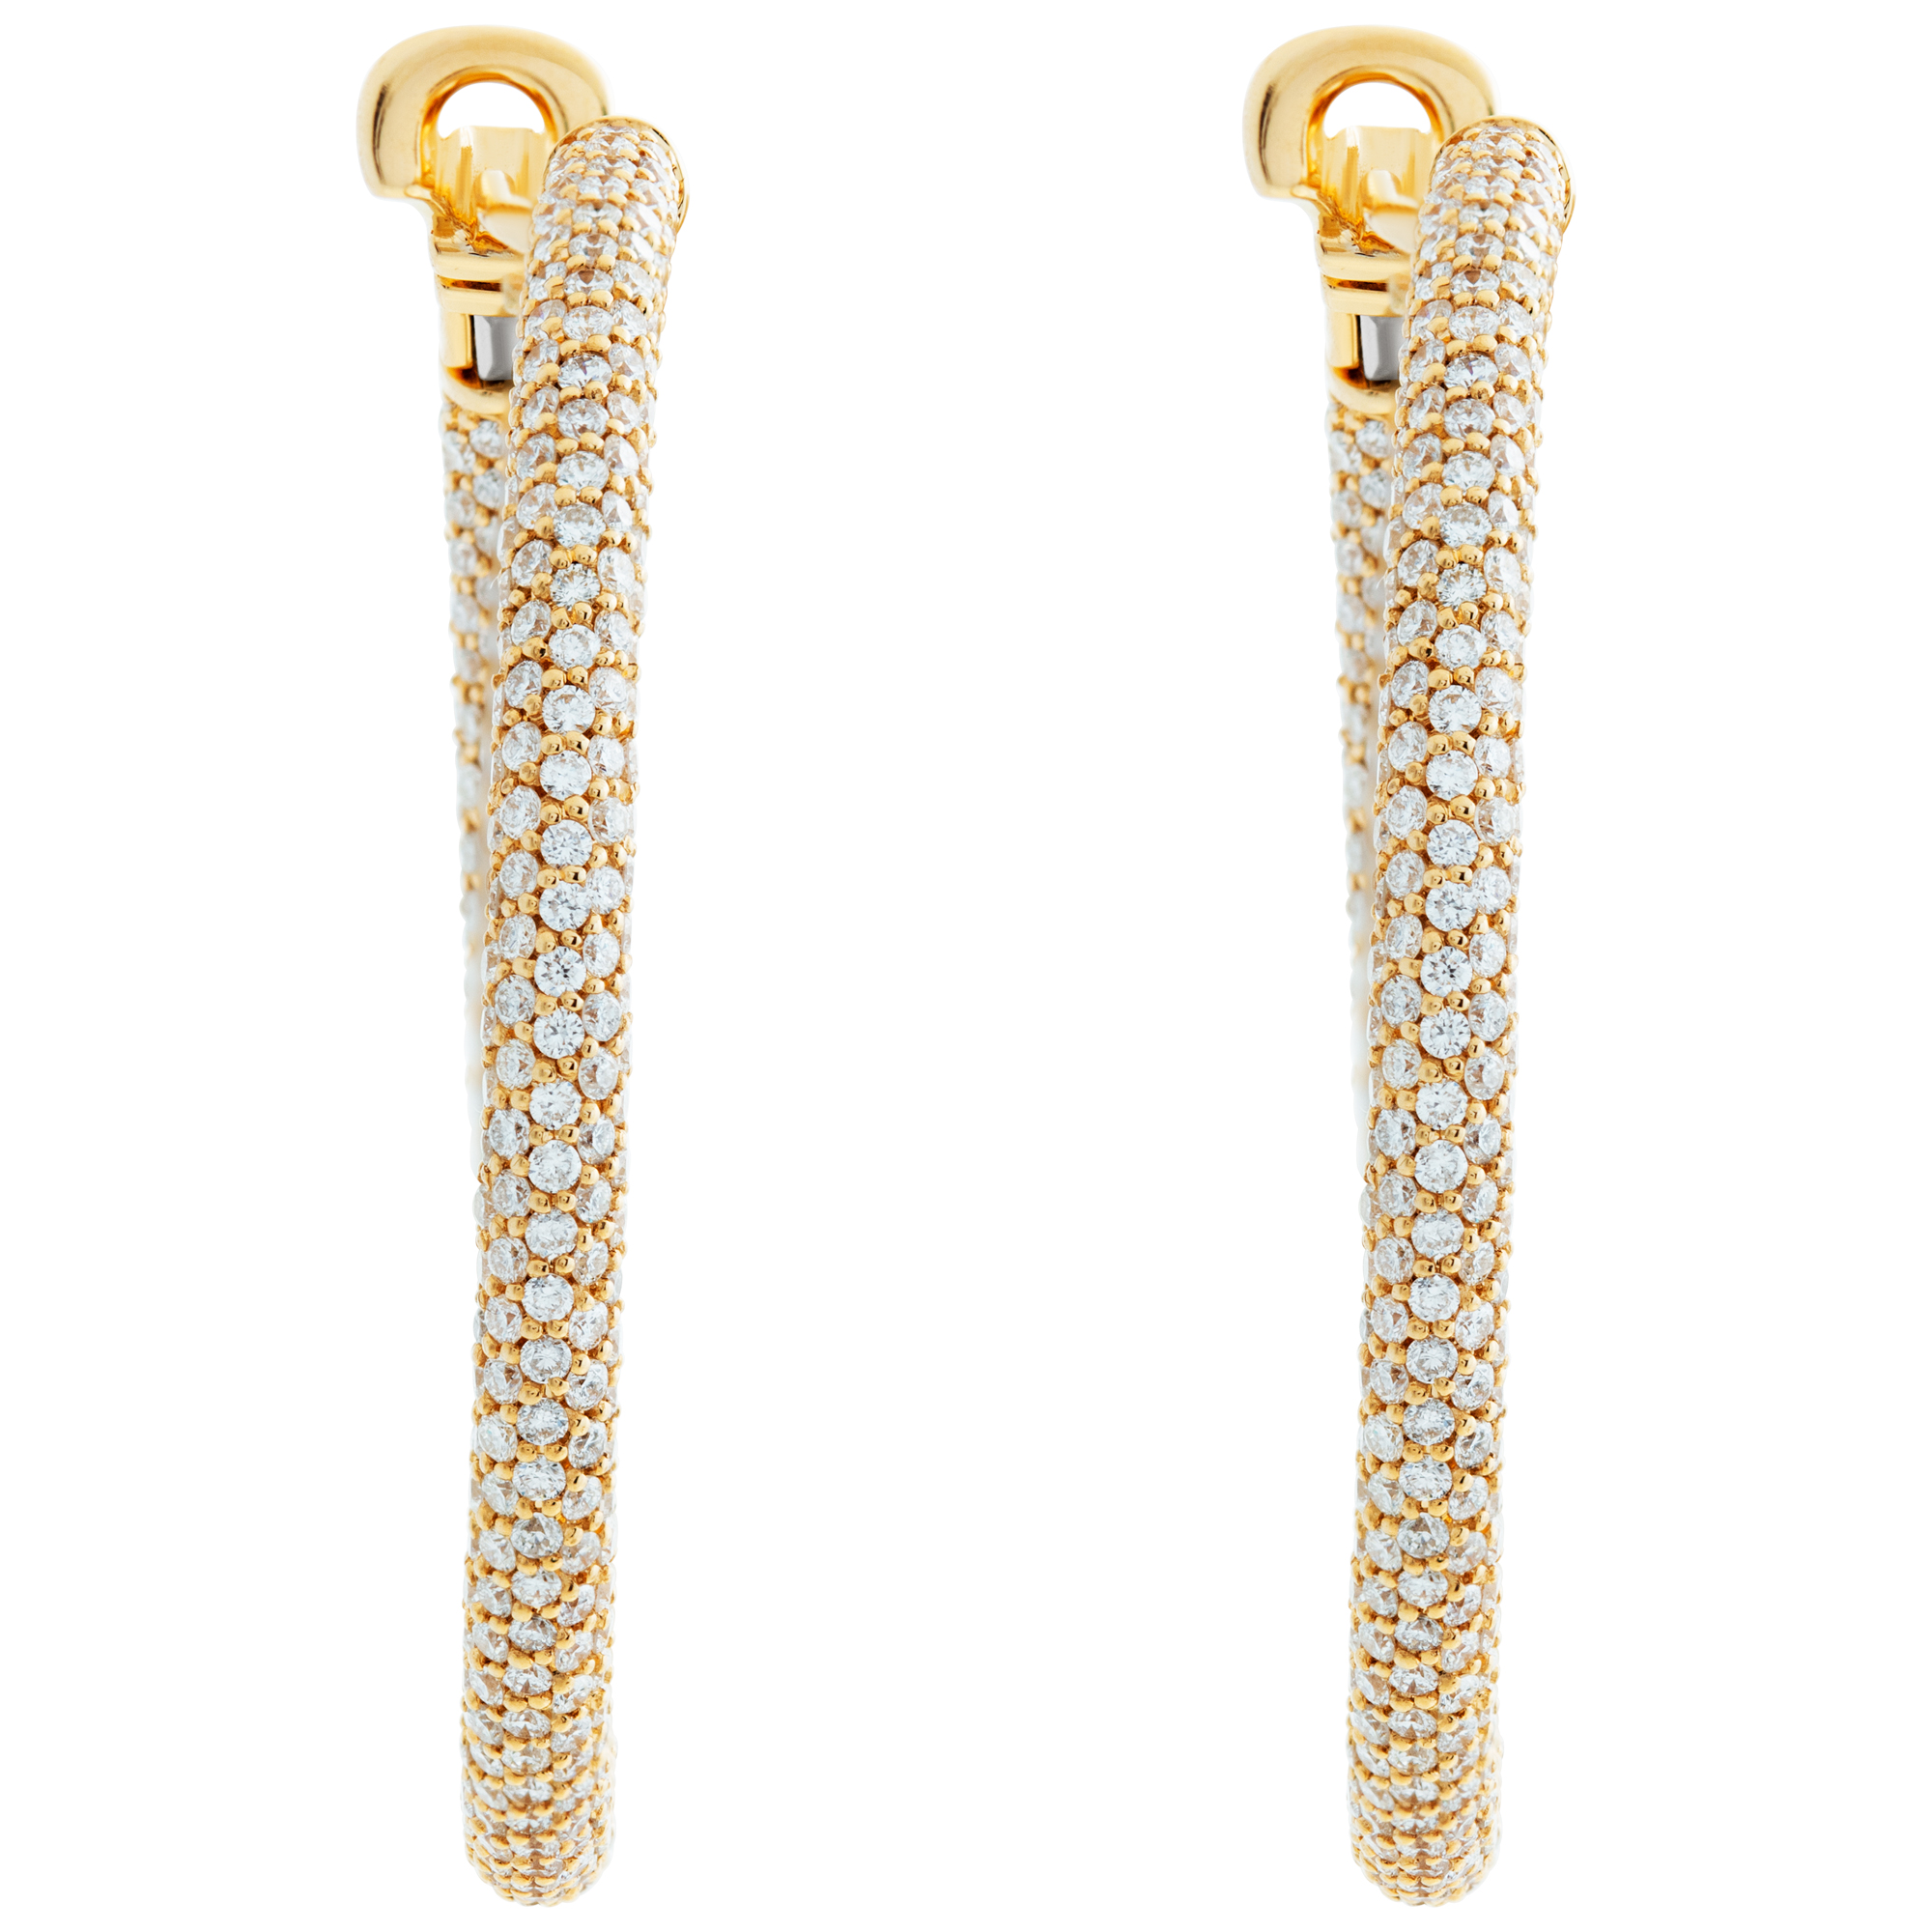 Stunning 18k yellow gold pave hoop earrings with 6.90 carats in round brilliant cut diamonds